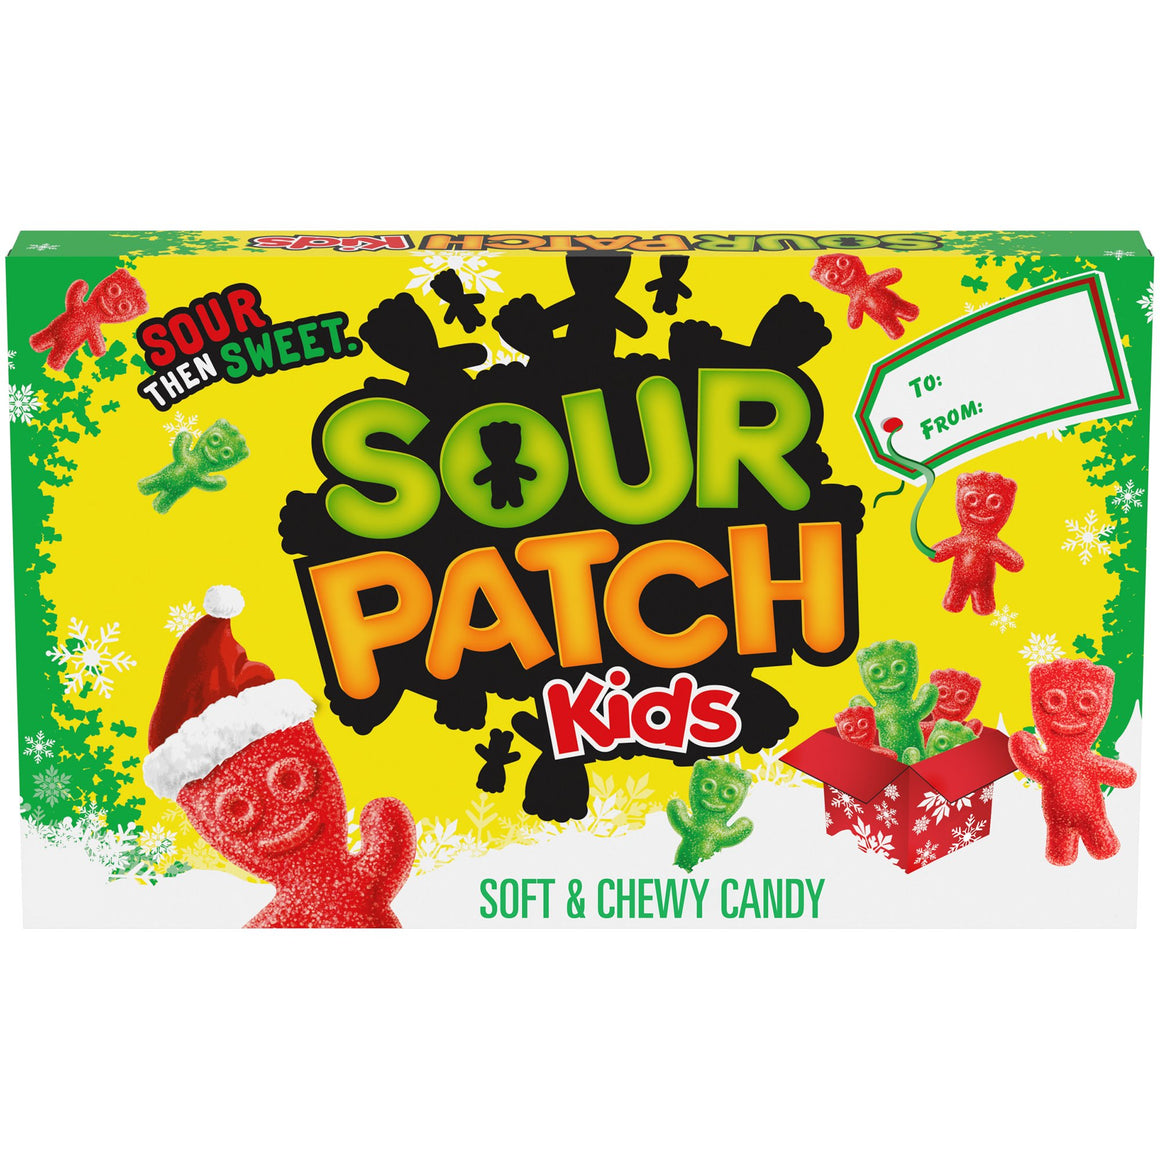 All City Candy Sour Patch Kids Green & Red Soft & Chewy Candy - 3.1-oz. Holiday Theater Box For fresh candy and great service, visit www.allcitycandy.com